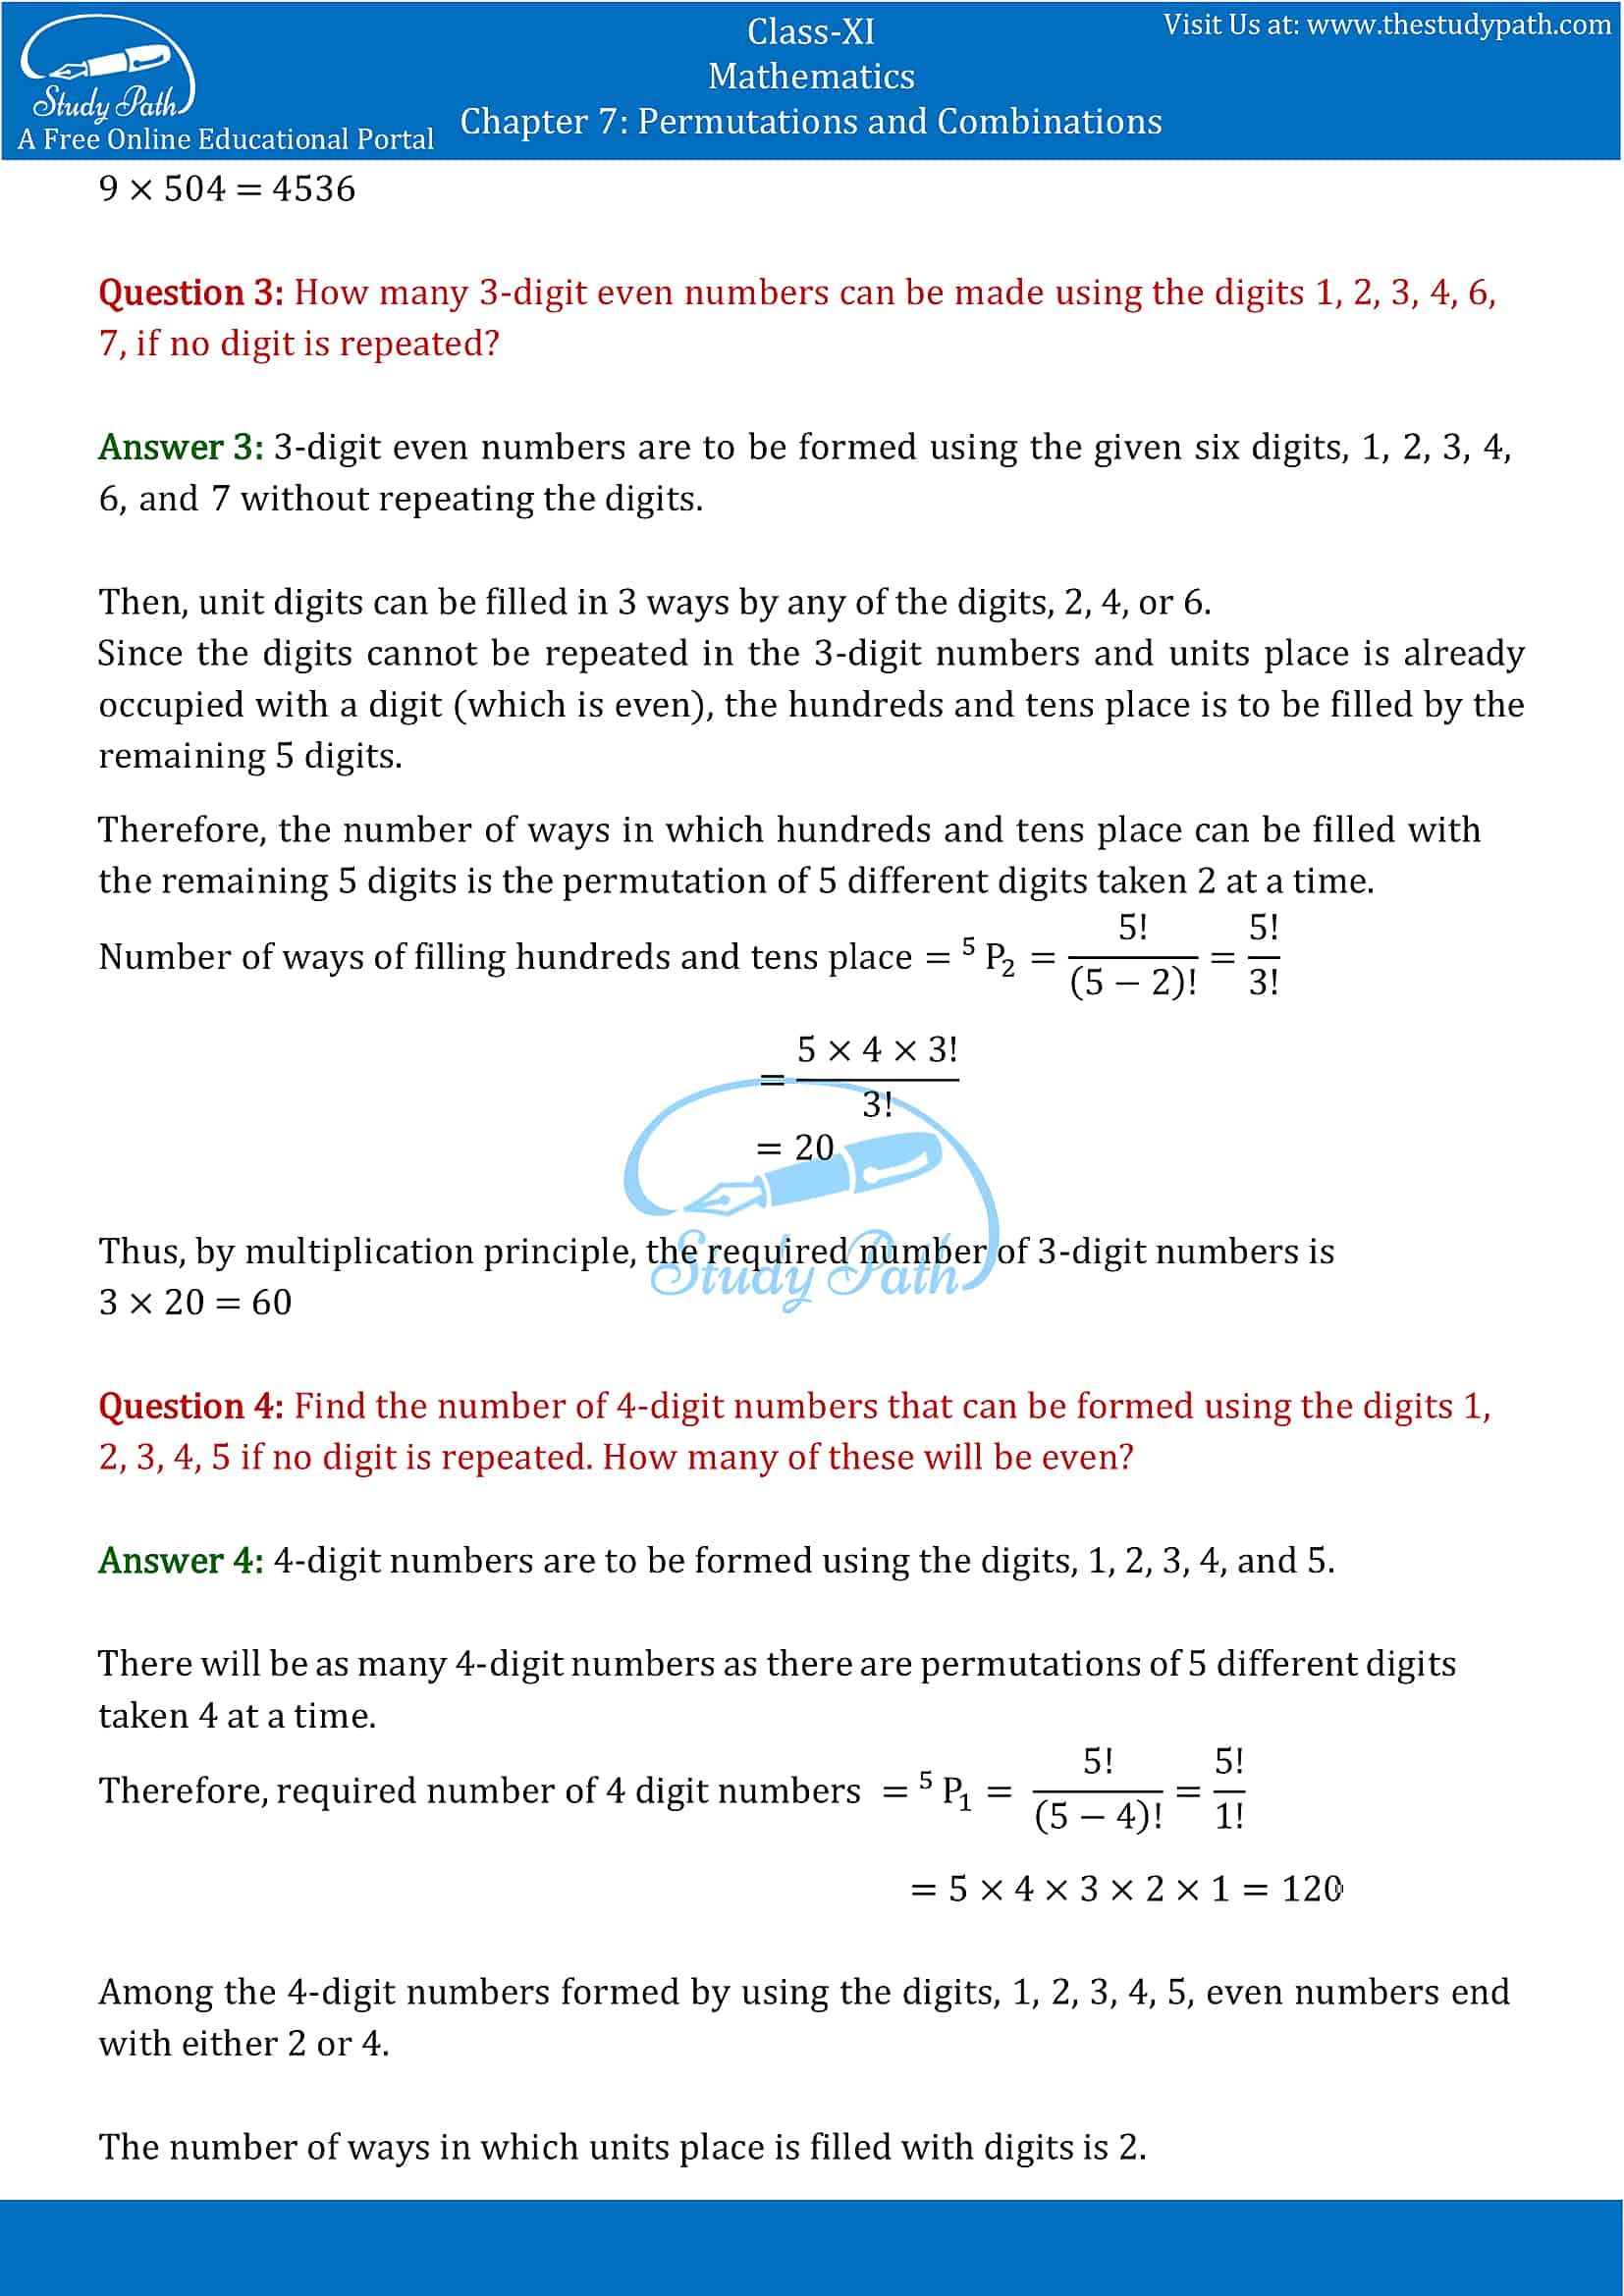 NCERT Solutions for Class 11 Maths chapter 7 Permutations and Combinations part-7